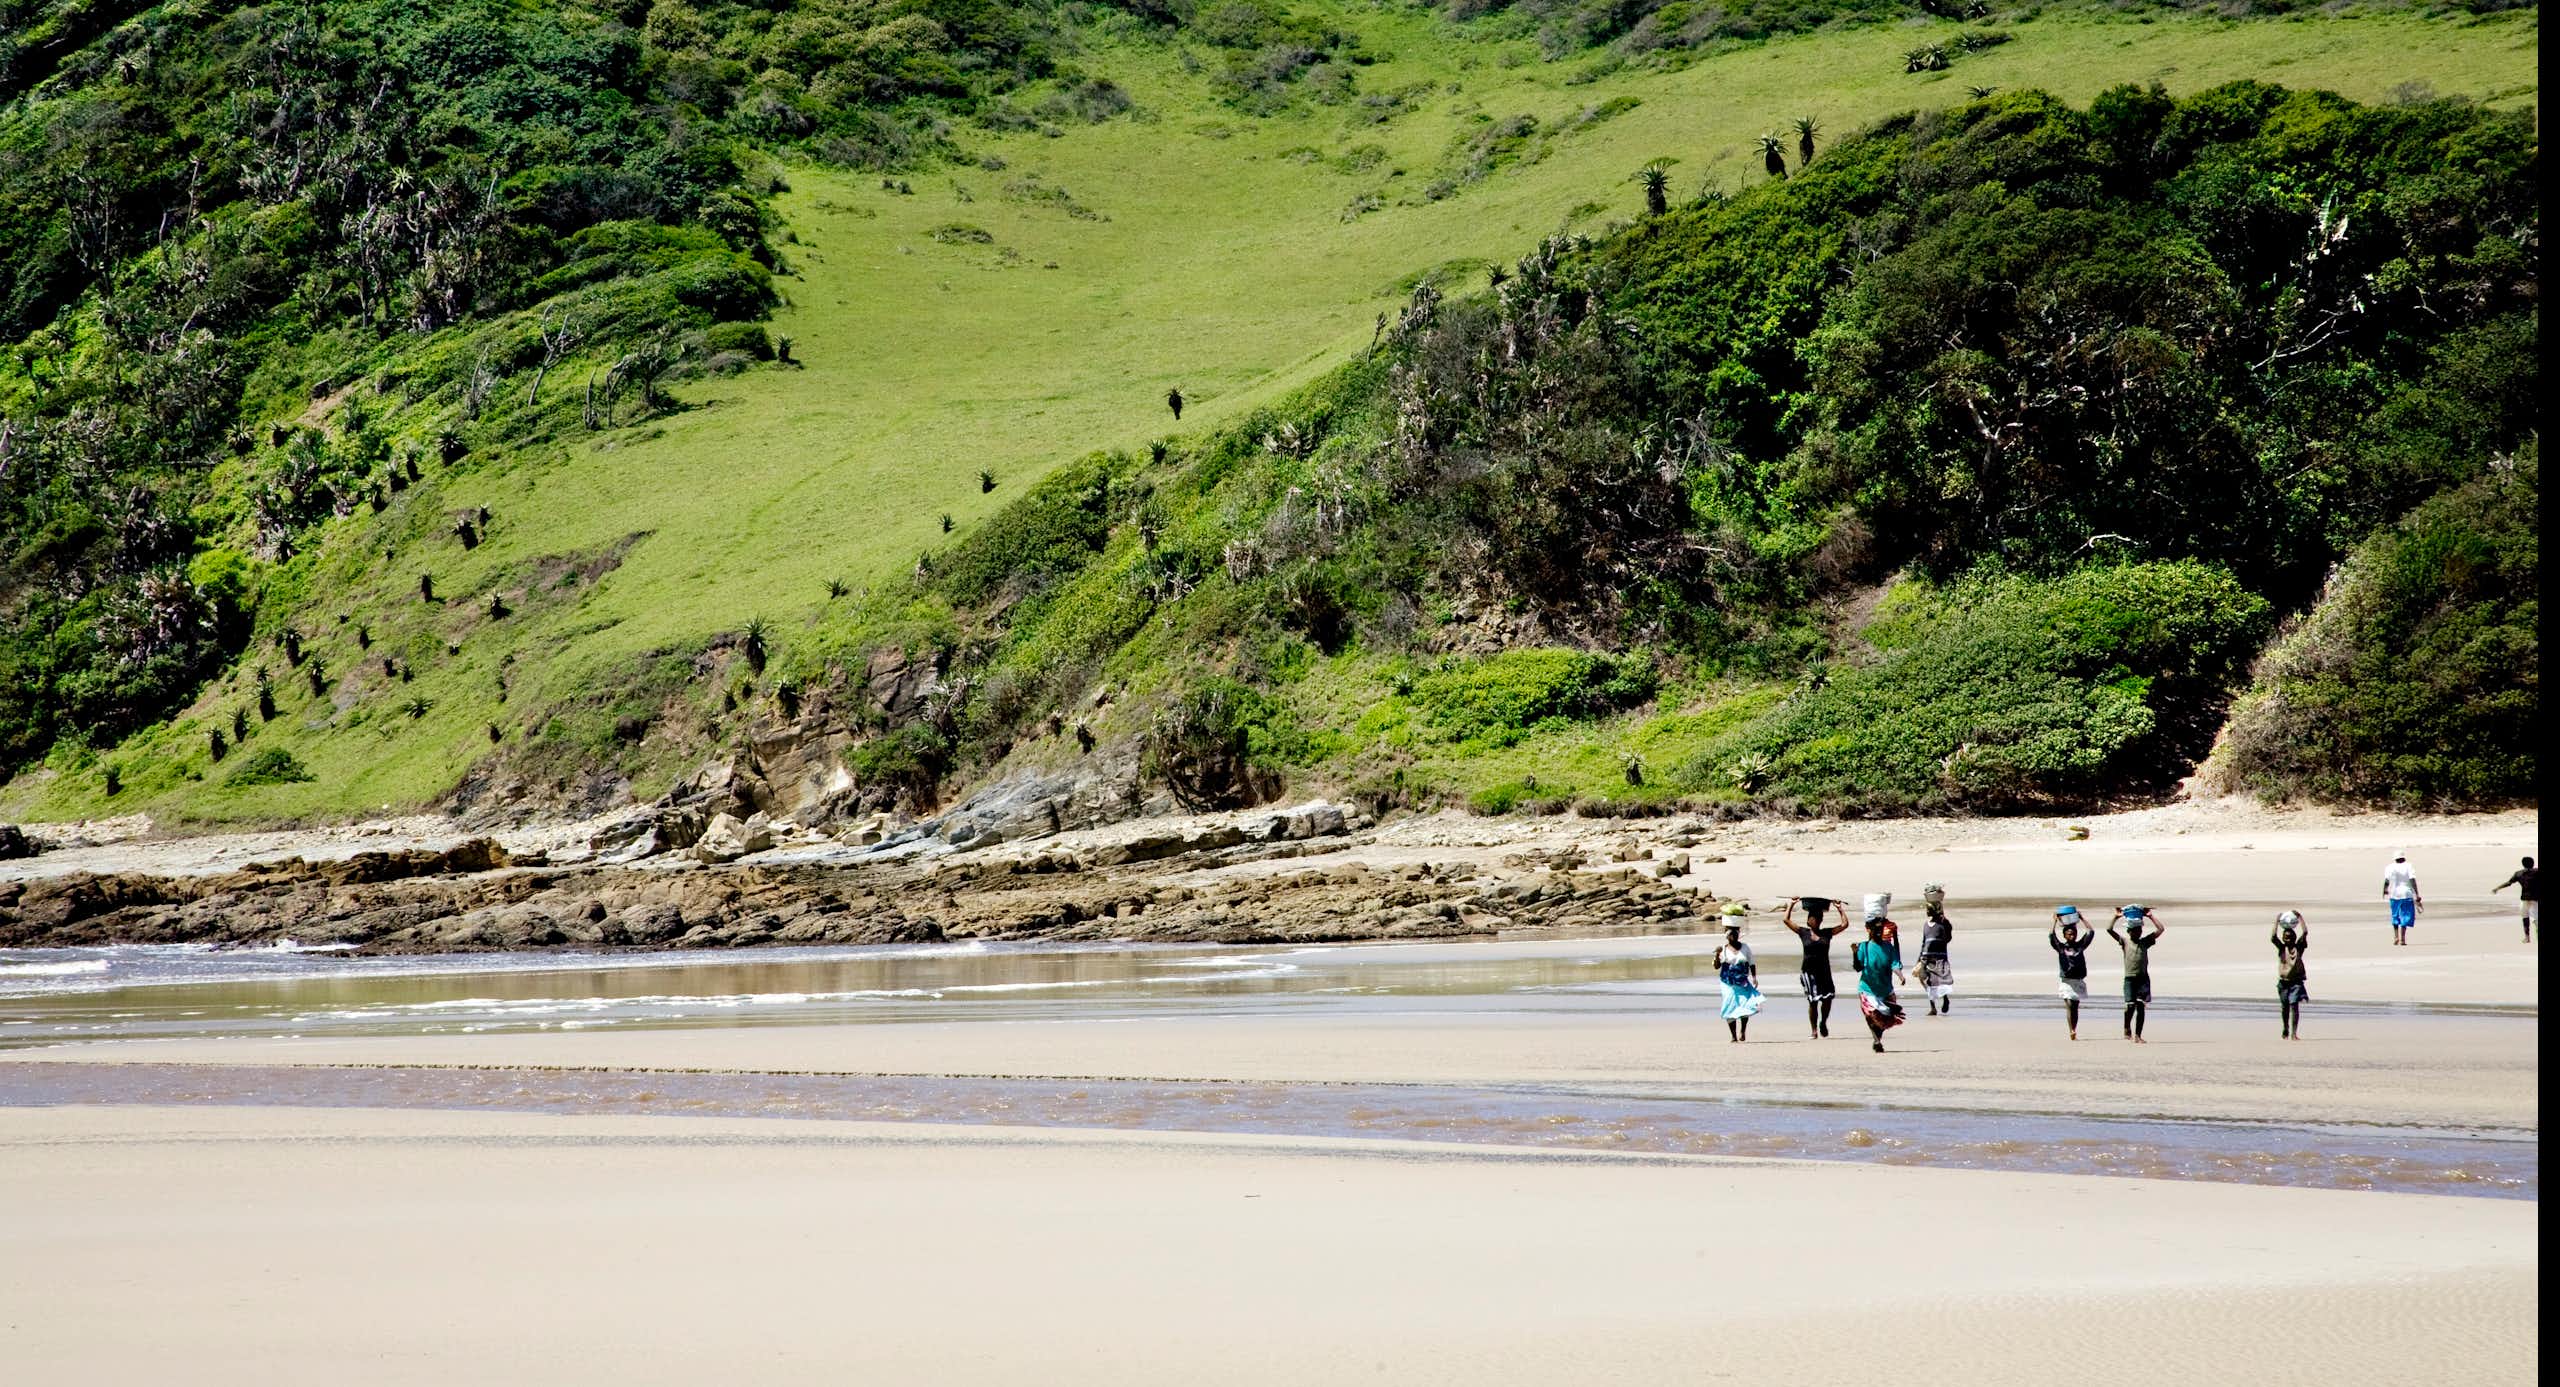 A verdant green landscape unfolds behind a rocky beach on which a group of people are walking with buckets balanced on their heads